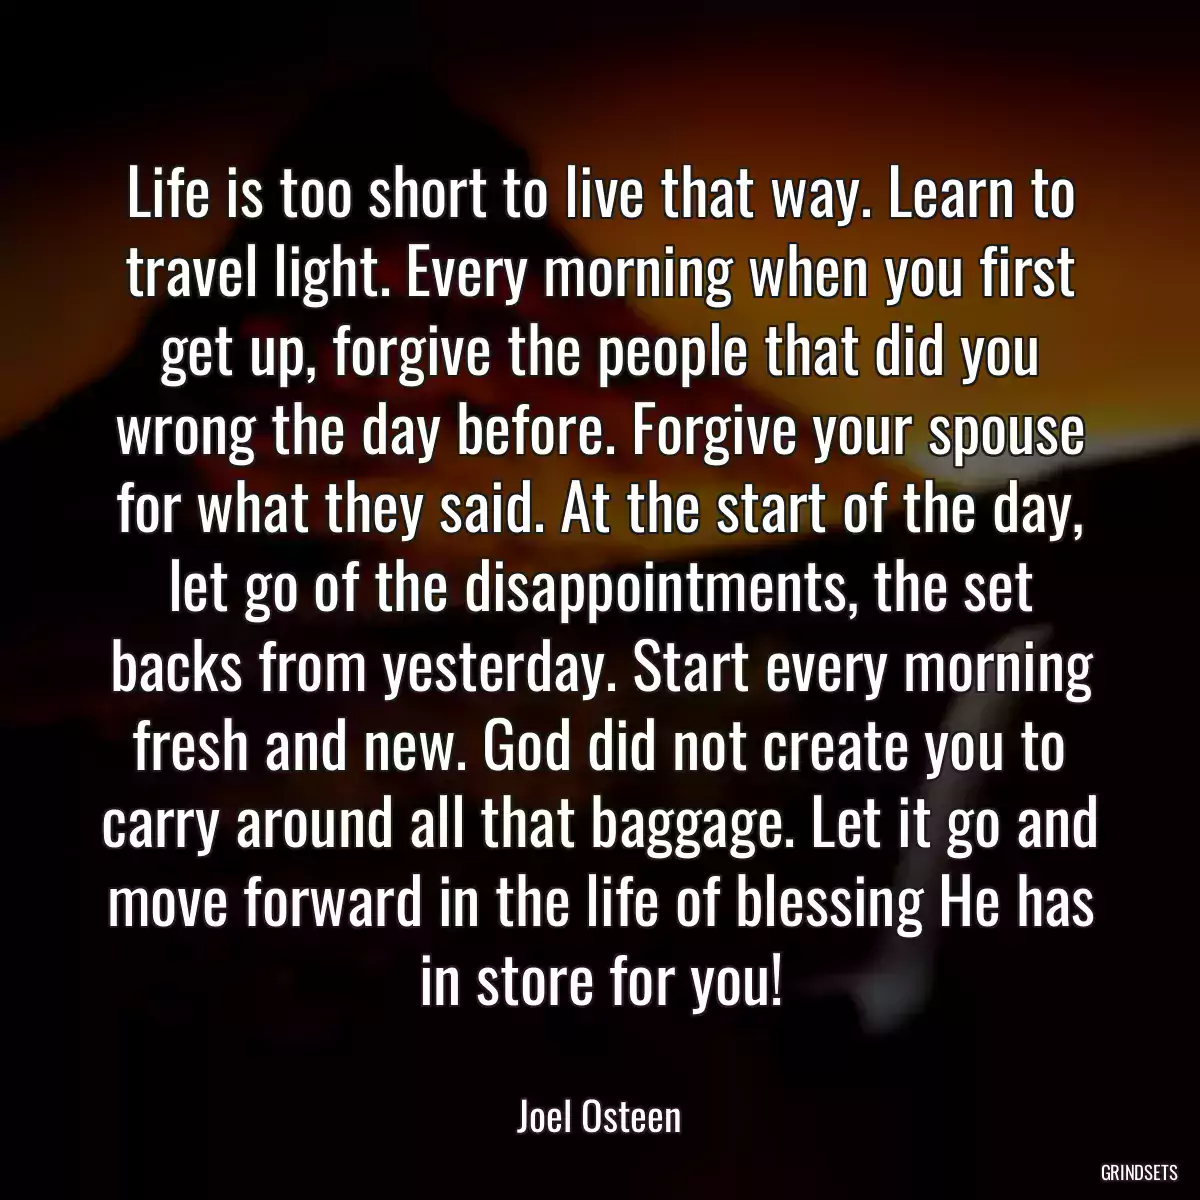 Life is too short to live that way. Learn to travel light. Every morning when you first get up, forgive the people that did you wrong the day before. Forgive your spouse for what they said. At the start of the day, let go of the disappointments, the set backs from yesterday. Start every morning fresh and new. God did not create you to carry around all that baggage. Let it go and move forward in the life of blessing He has in store for you!